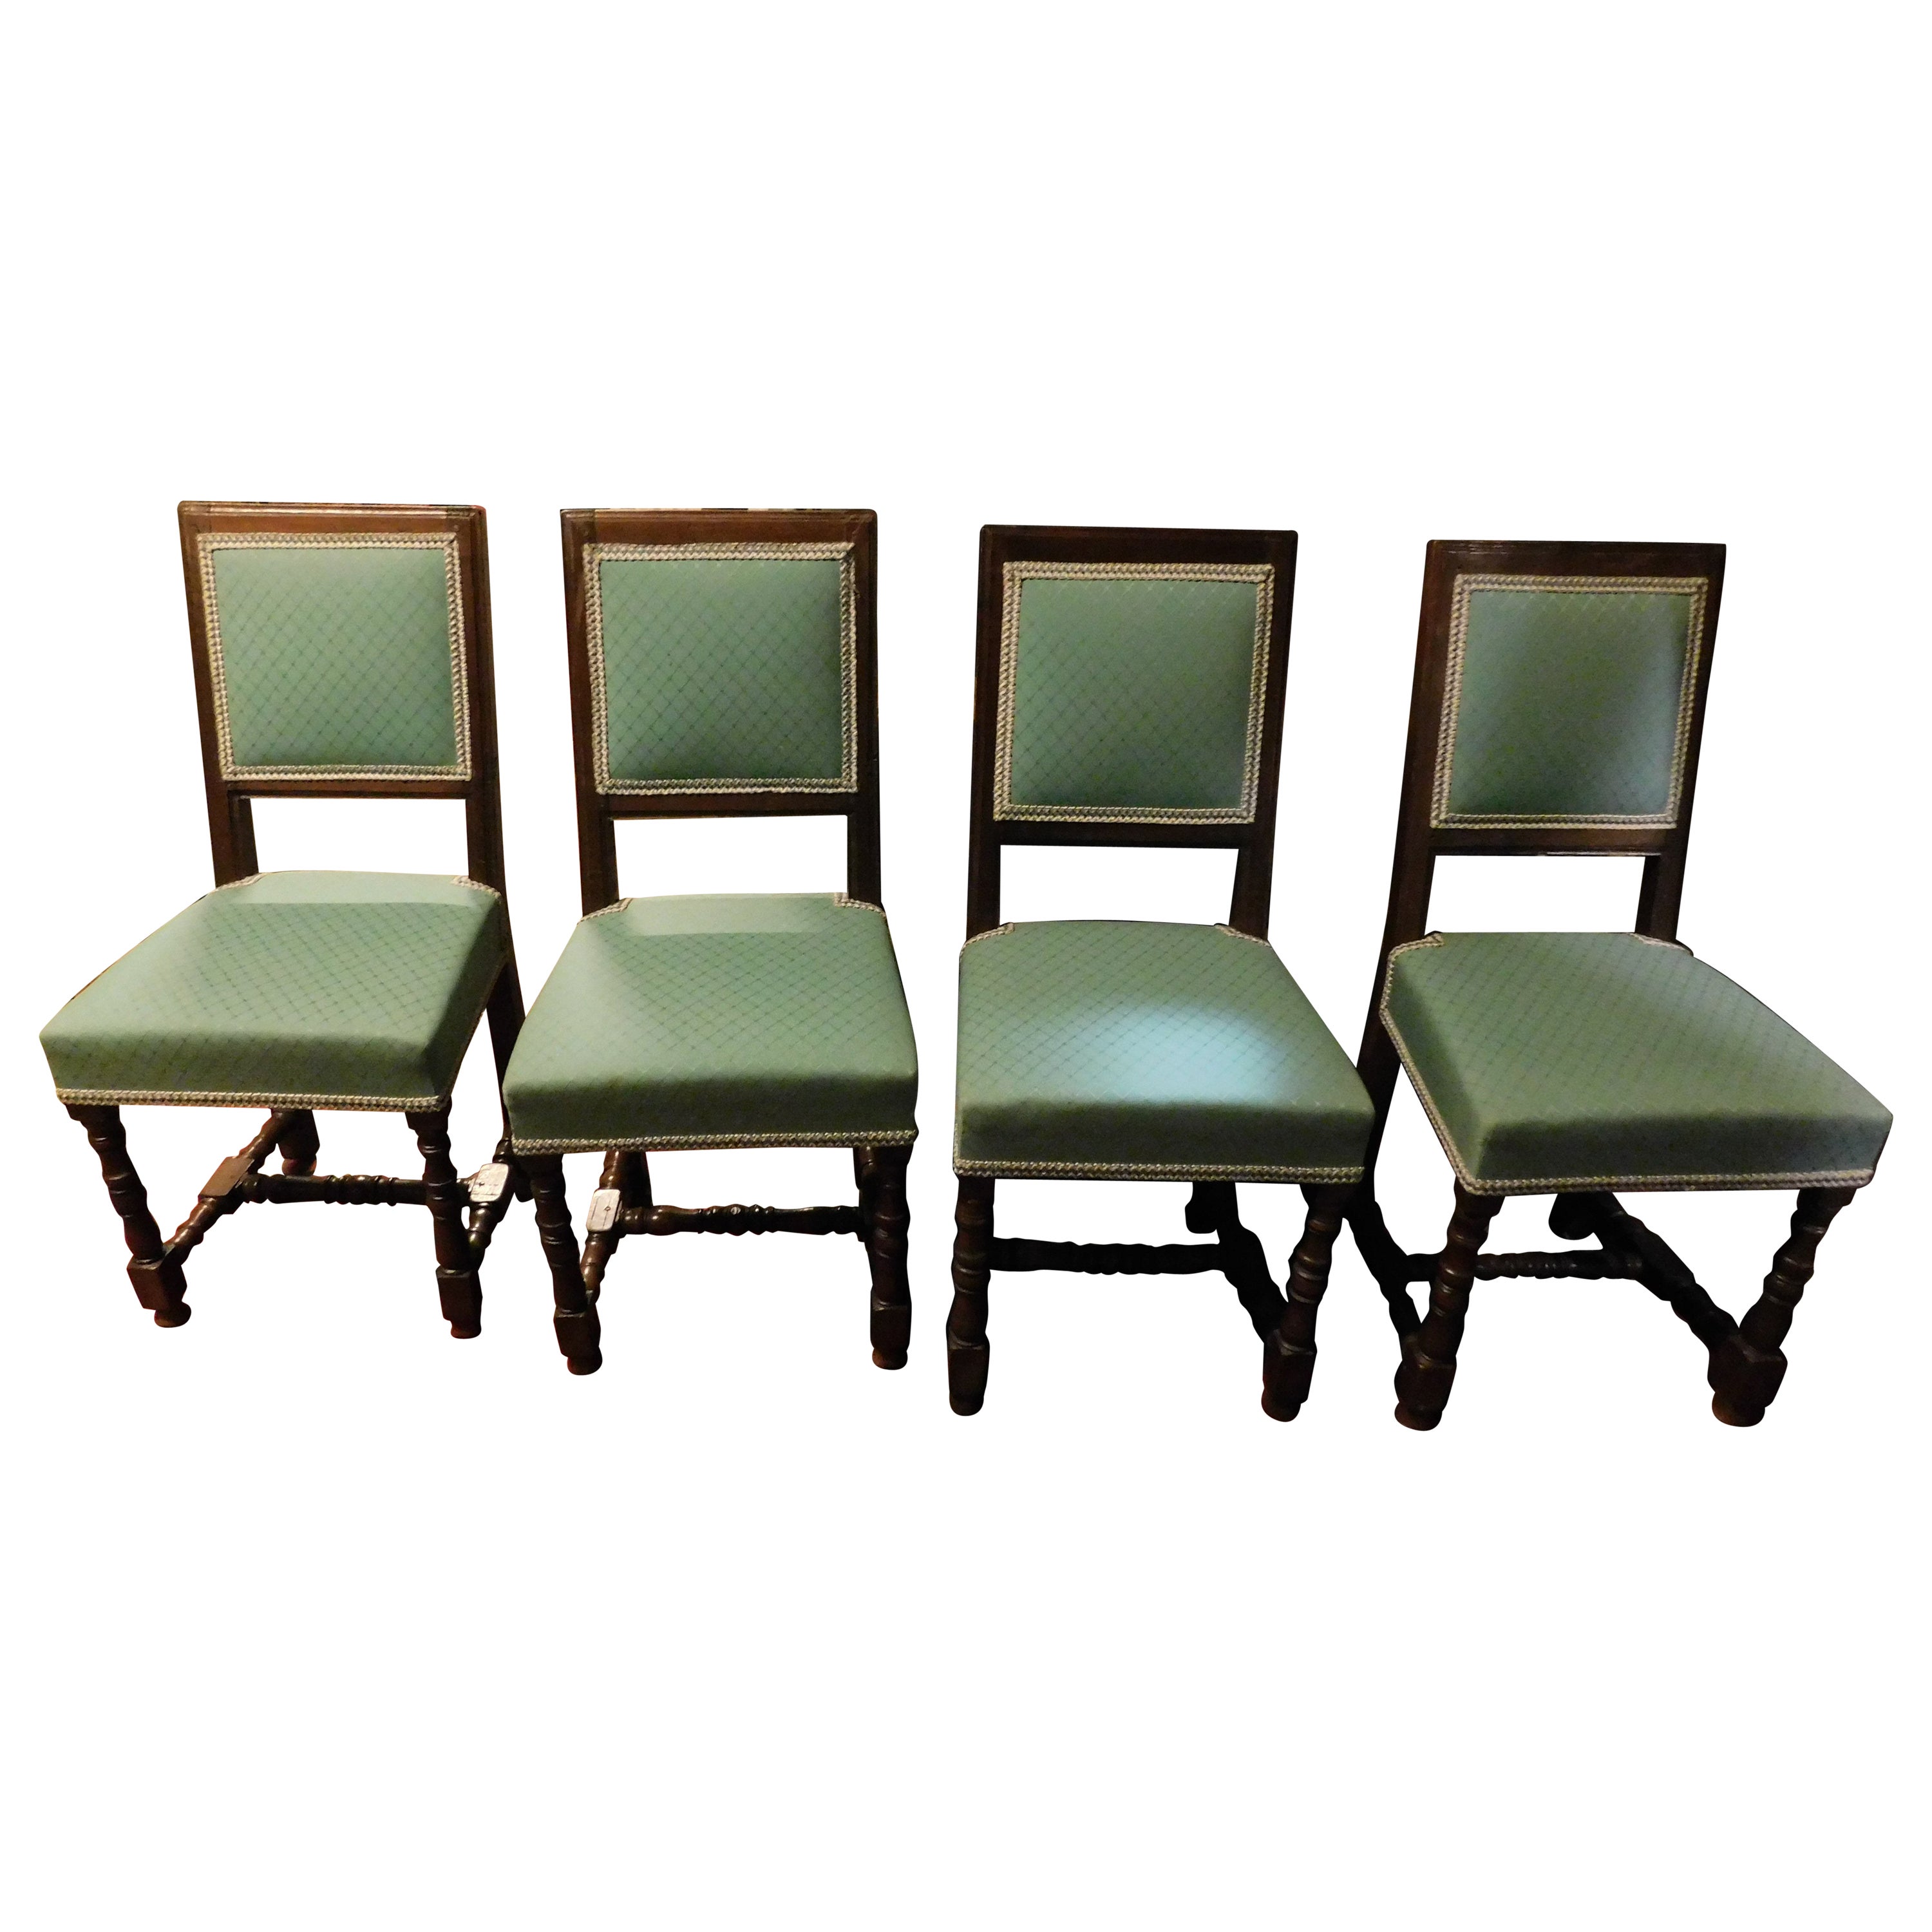 Set of 4 spool chairs in walnut, upholstery replaced, Italy For Sale